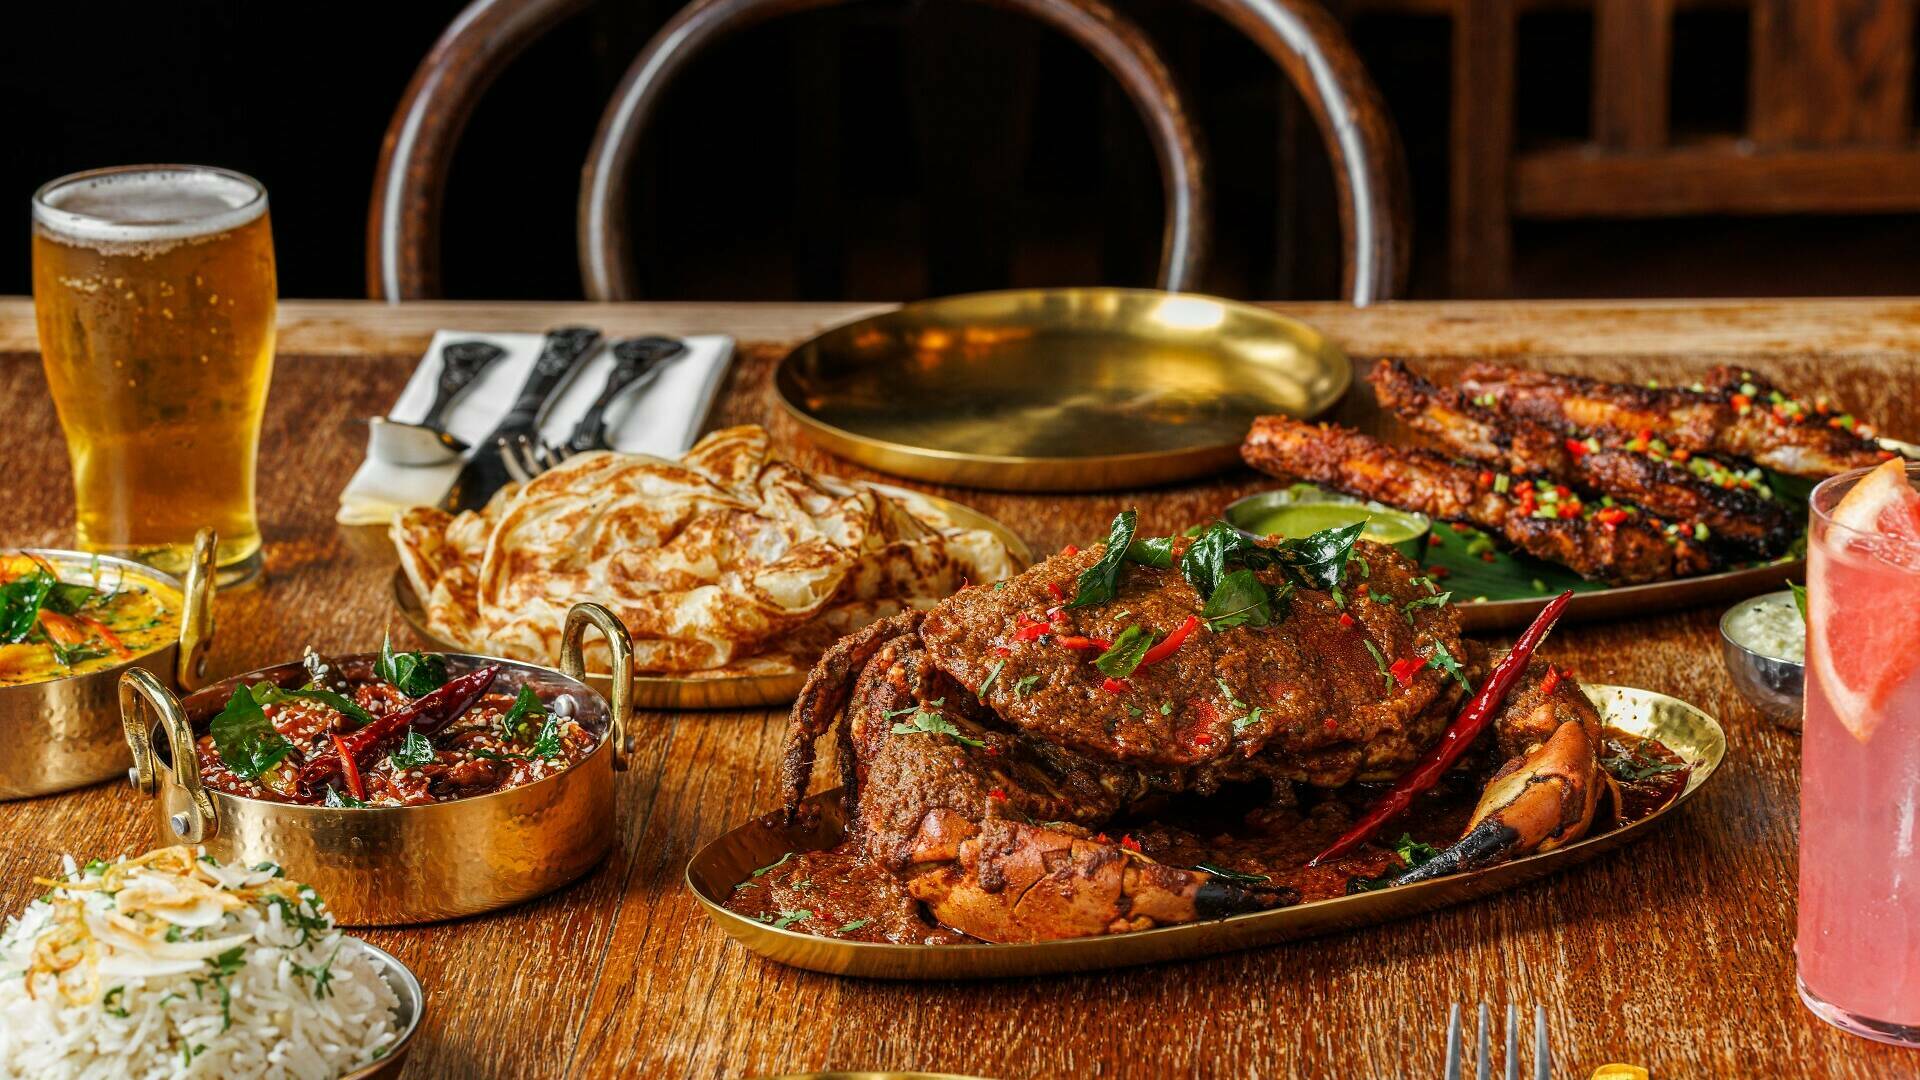 Beloved north London restaurant The Tamil Prince is opening a new pub in Islington